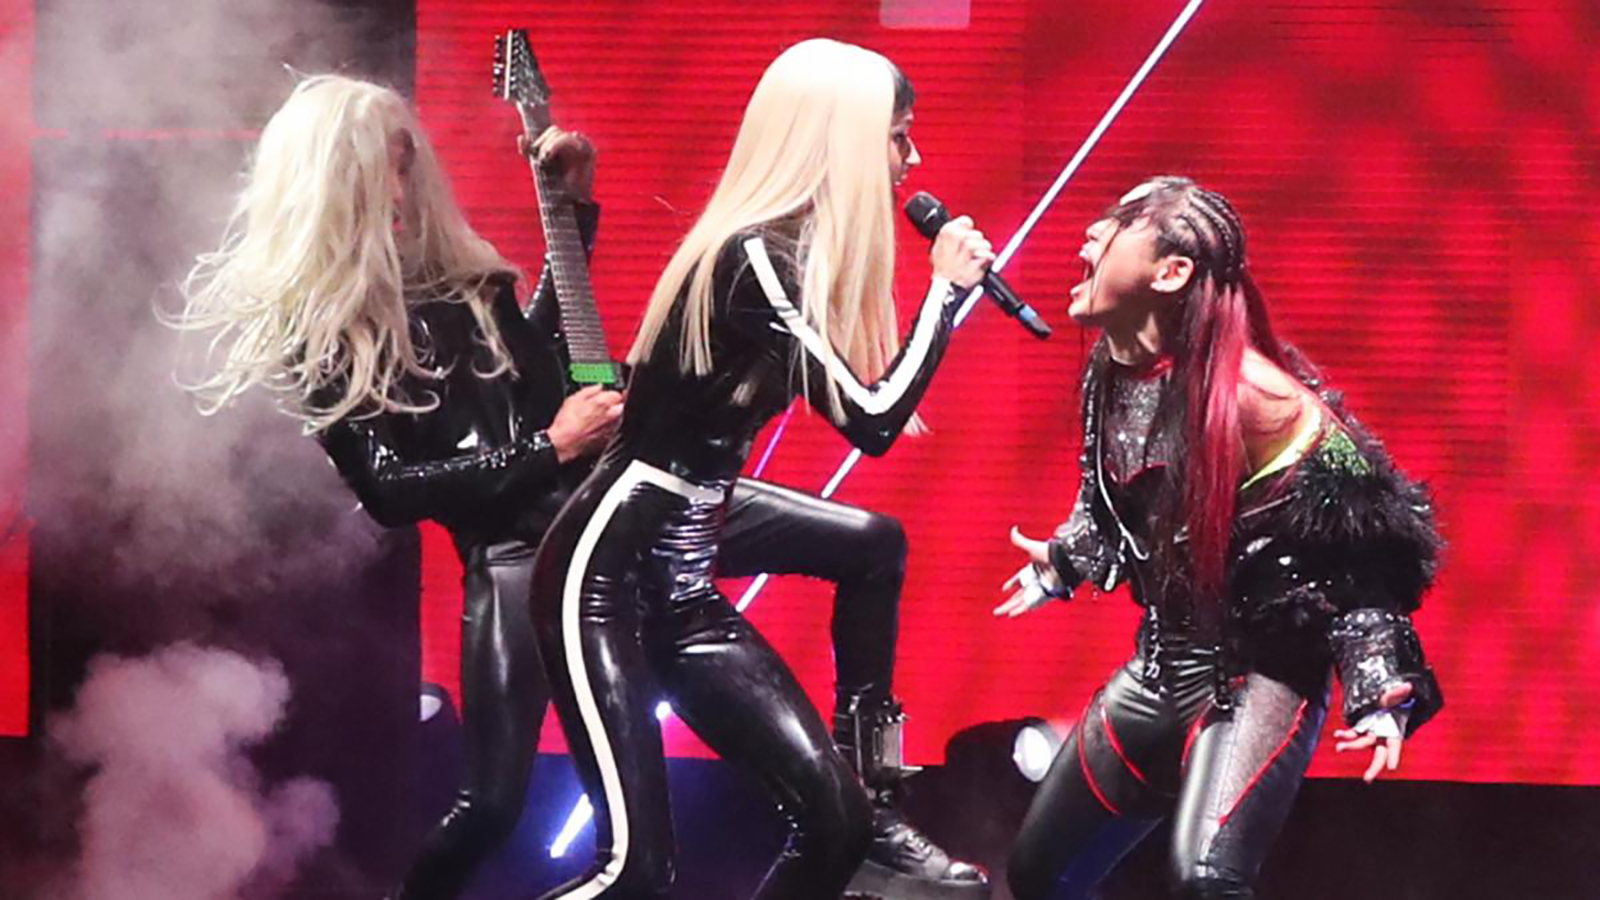 See Poppy Bring Masked Metal Insanity To Wwe Nxt Revolver